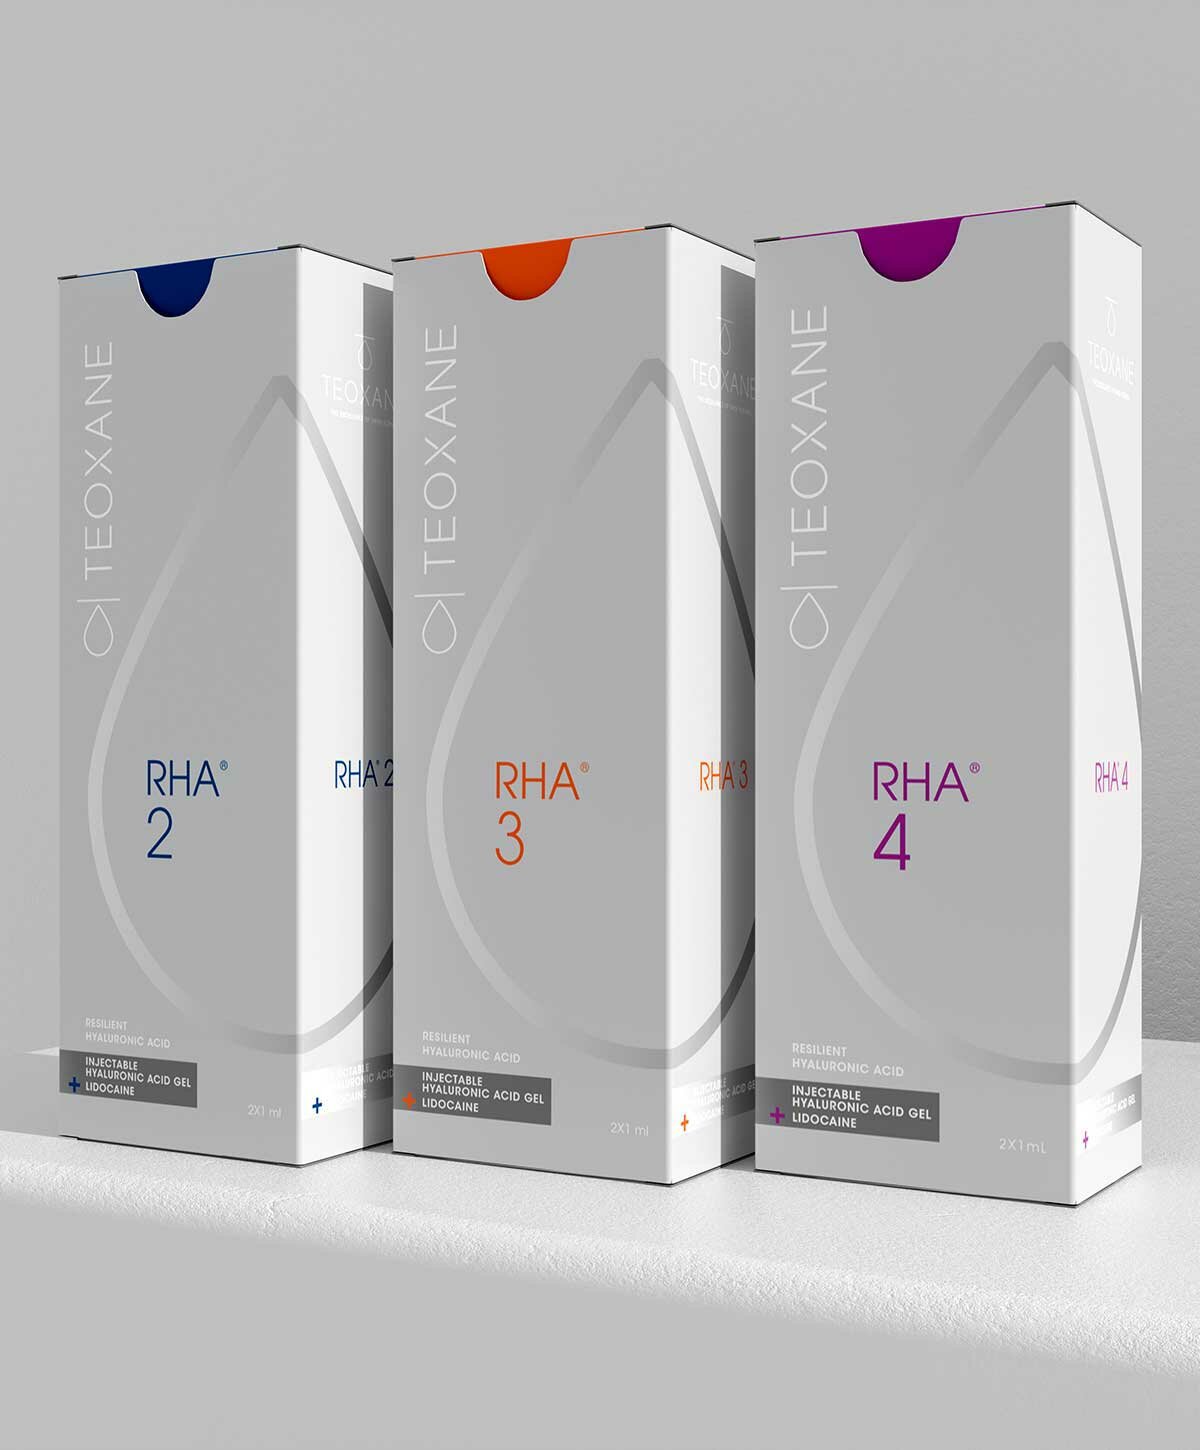 RHA 2, 3 and 4 boxes